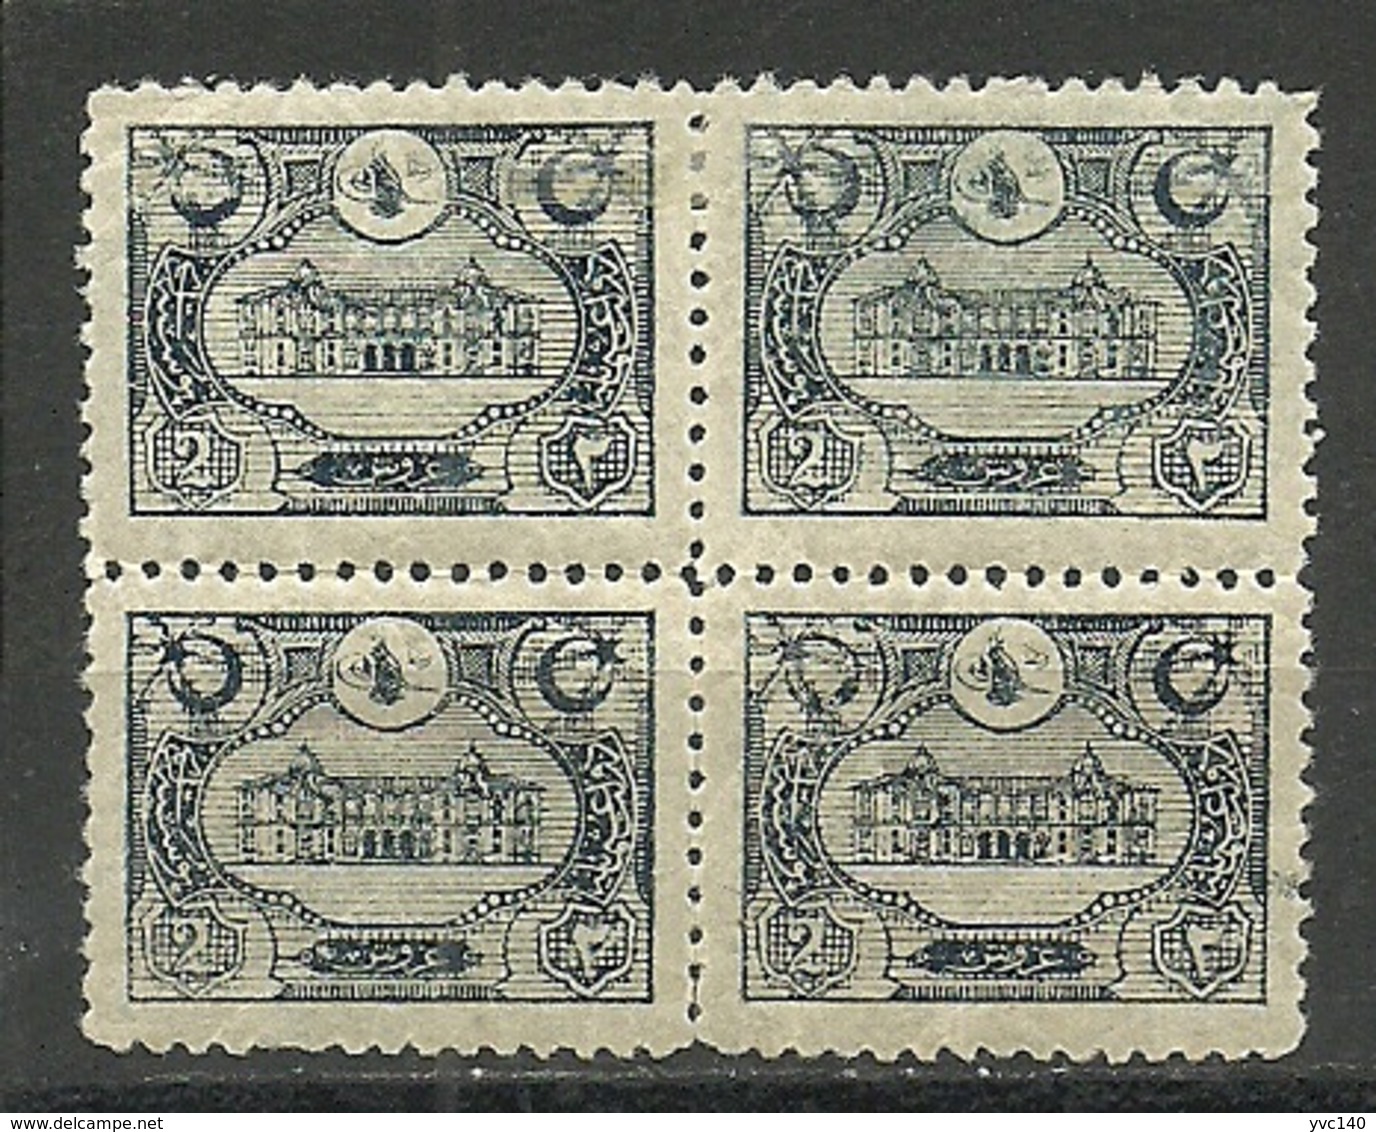 Turkey; 1913 Postage Stamp With The General Post Office New Building Picture 2 K. "Offset Printing On Back" - Ongebruikt